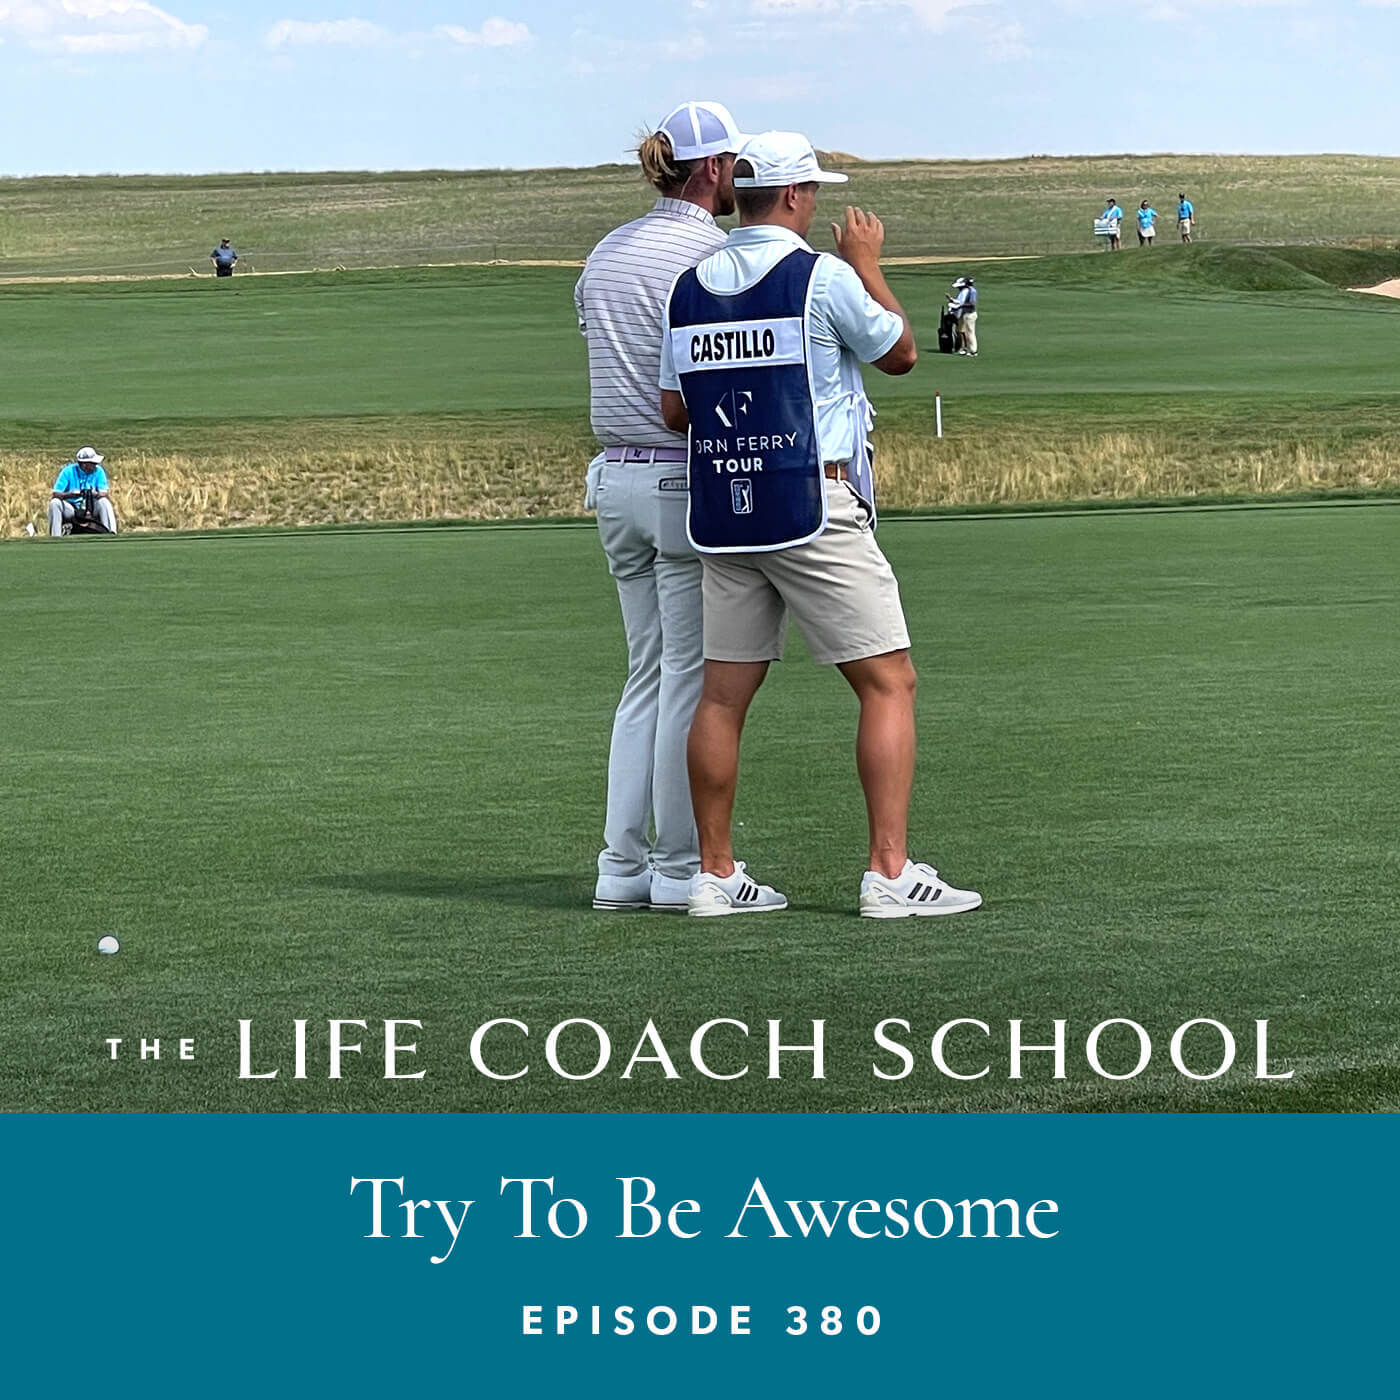 The Life Coach School Podcast with Brooke Castillo | Try To Be Awesome